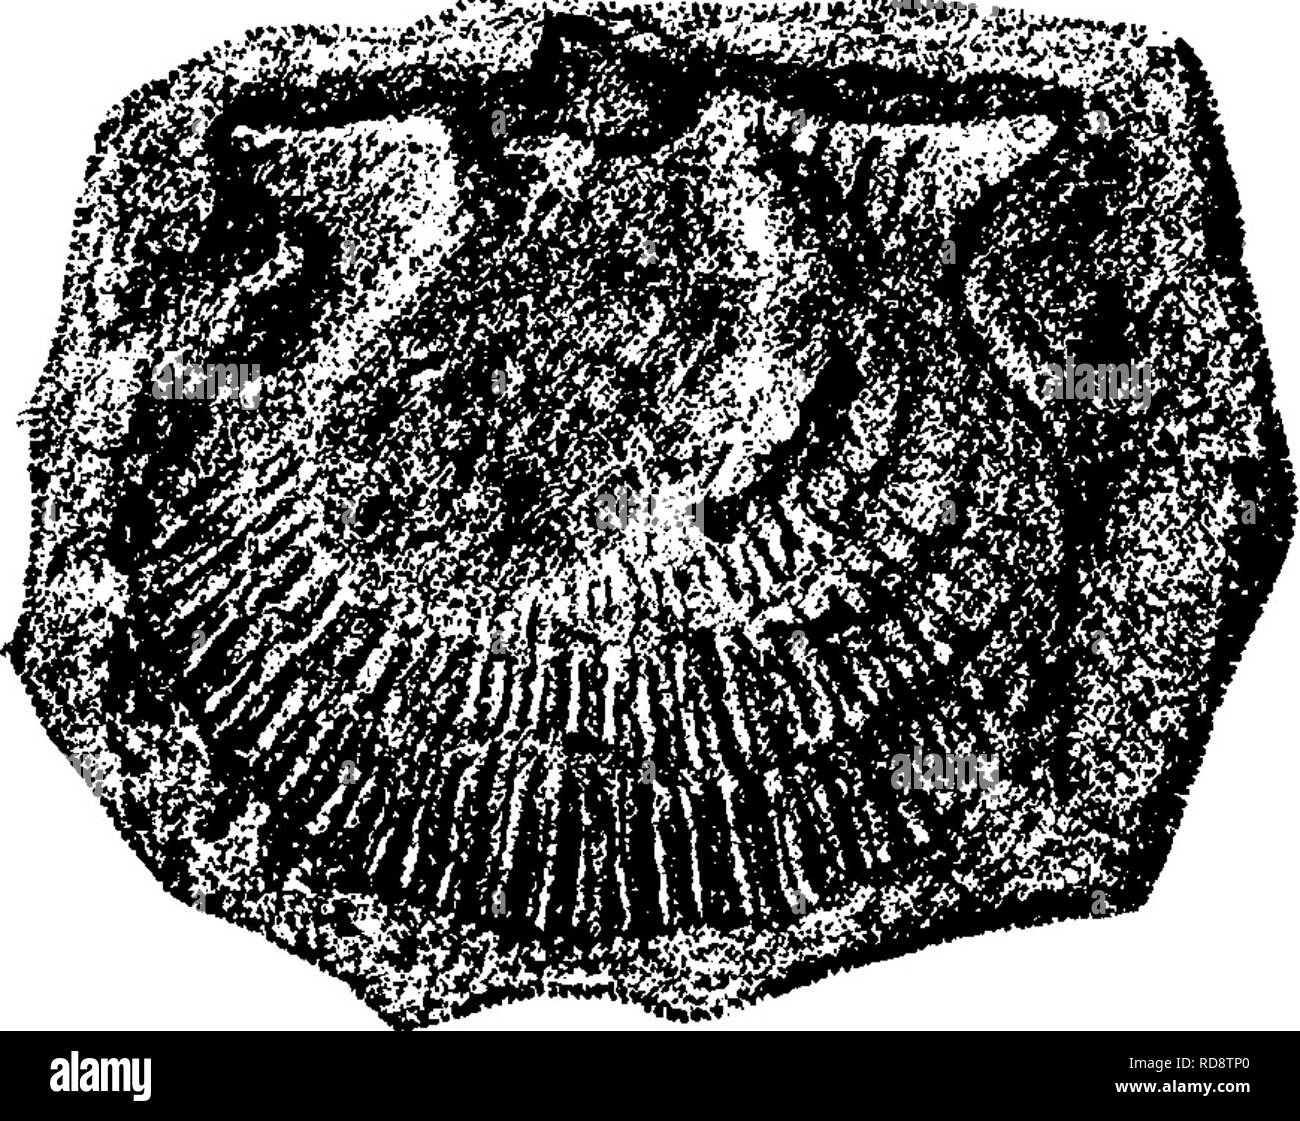 . A dictionary of the fossils of Pennsylvania and neighboring states named in the reports and catalogues of the survey ... Paleontology. â 5A AVICULOPECTer* OCCIDENTAUS.. 5 AVICULOPECTEN OCCrOENTAUS. Aviculopecten occidentalis. (Shumard, in Swallow's Missouri Rt. of J(lll...ssg^^^s^ 3, ^ 1855, page 207, plate 0, fig. 18.) Collett's Indiana Rt. of 1883,pagel43, plate 28, fig. 3, outside view of left valve, natural size. XIII-XY. One of the commonest shells of the Upper and Lower Coal Measures, from Indiana westward ; has been found in Utah and Arizona ; ranges up into the Permian (Meek.) Note.â Stock Photo